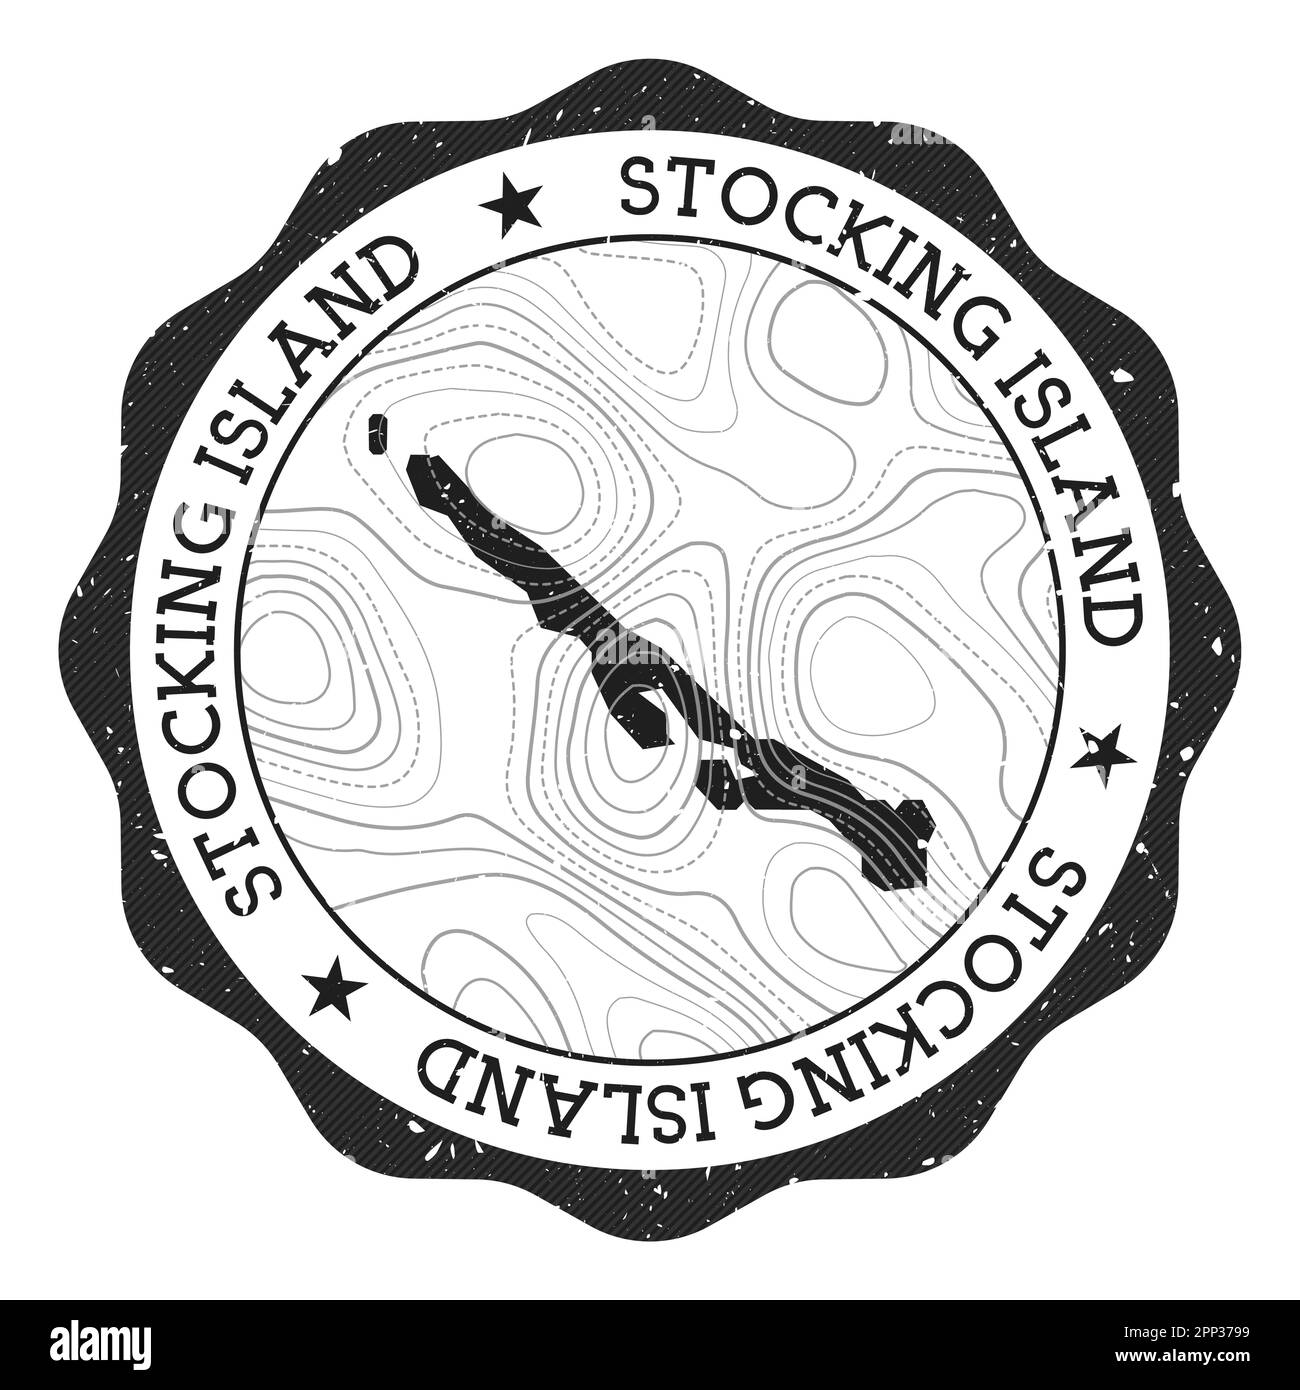 Stocking Island outdoor stamp. Round sticker with map with topographic isolines. Vector illustration. Can be used as insignia, logotype, label, sticke Stock Vector